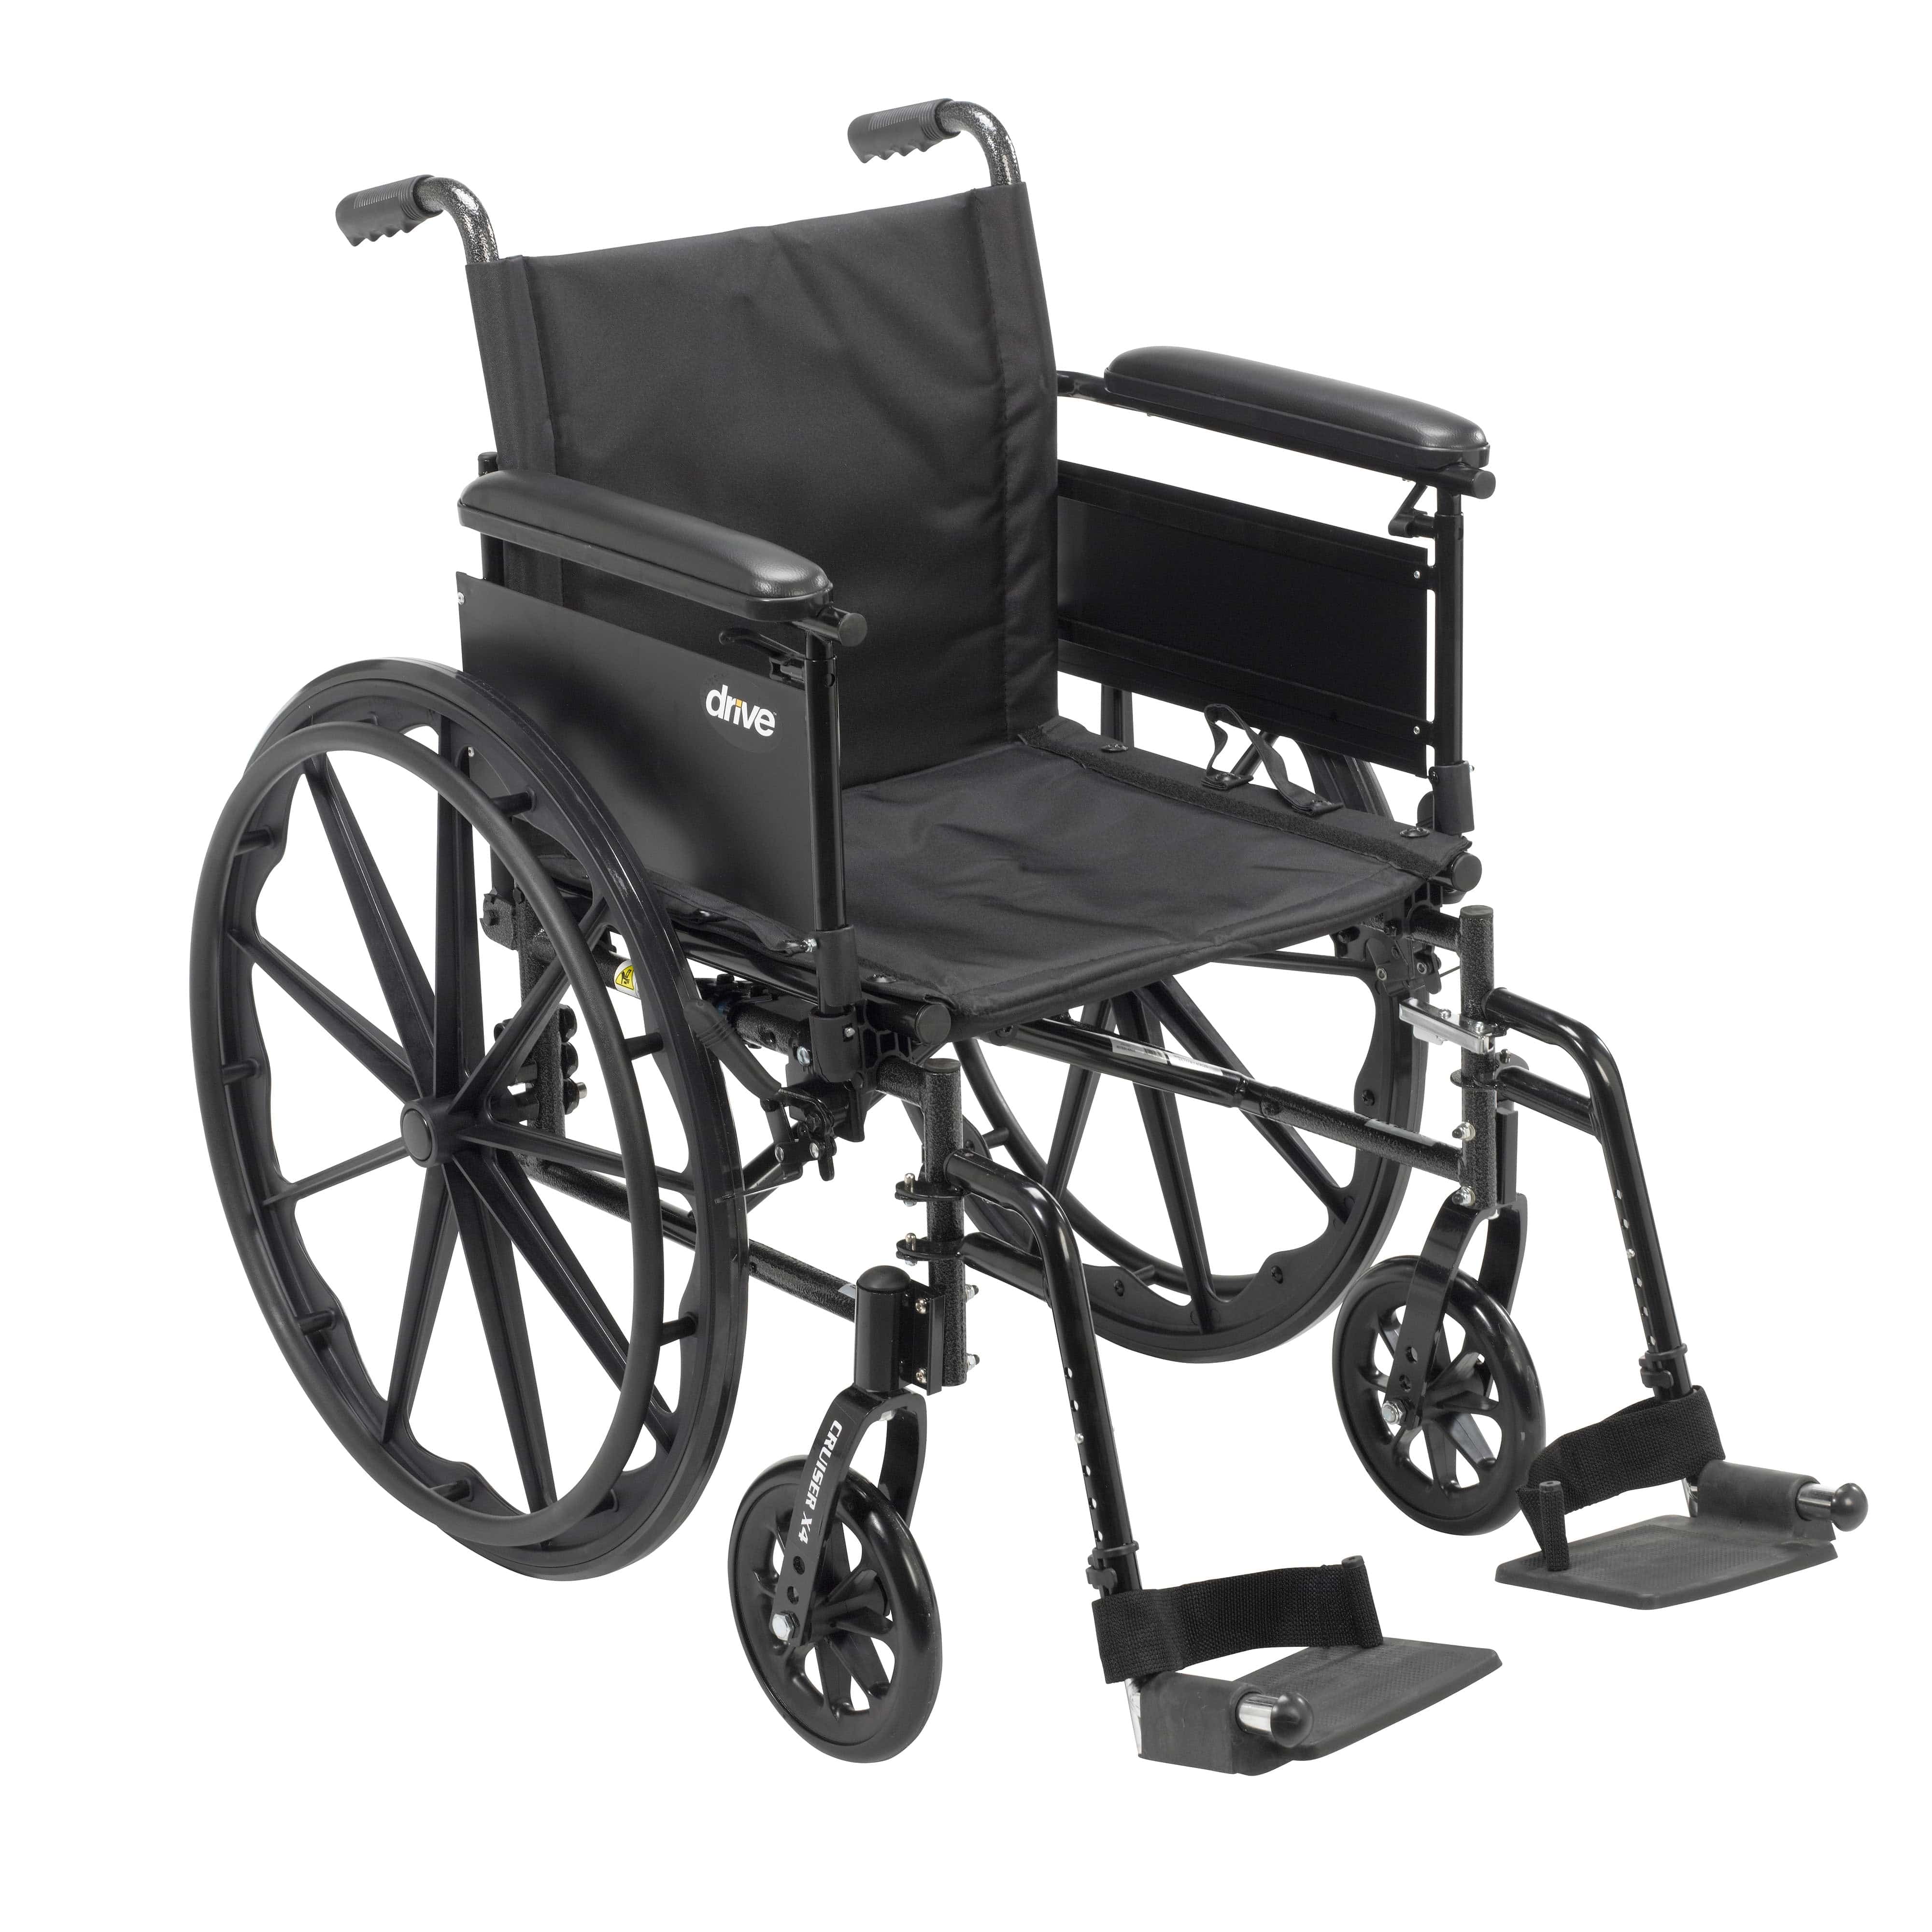 Drive Medical Wheelchairs/Lightweight Wheelchairs Full Arms / Swing Away Footrests / 16" Seat Drive Medical Cruiser X4 Lightweight Dual Axle Wheelchair with Adjustable Detatchable Arms